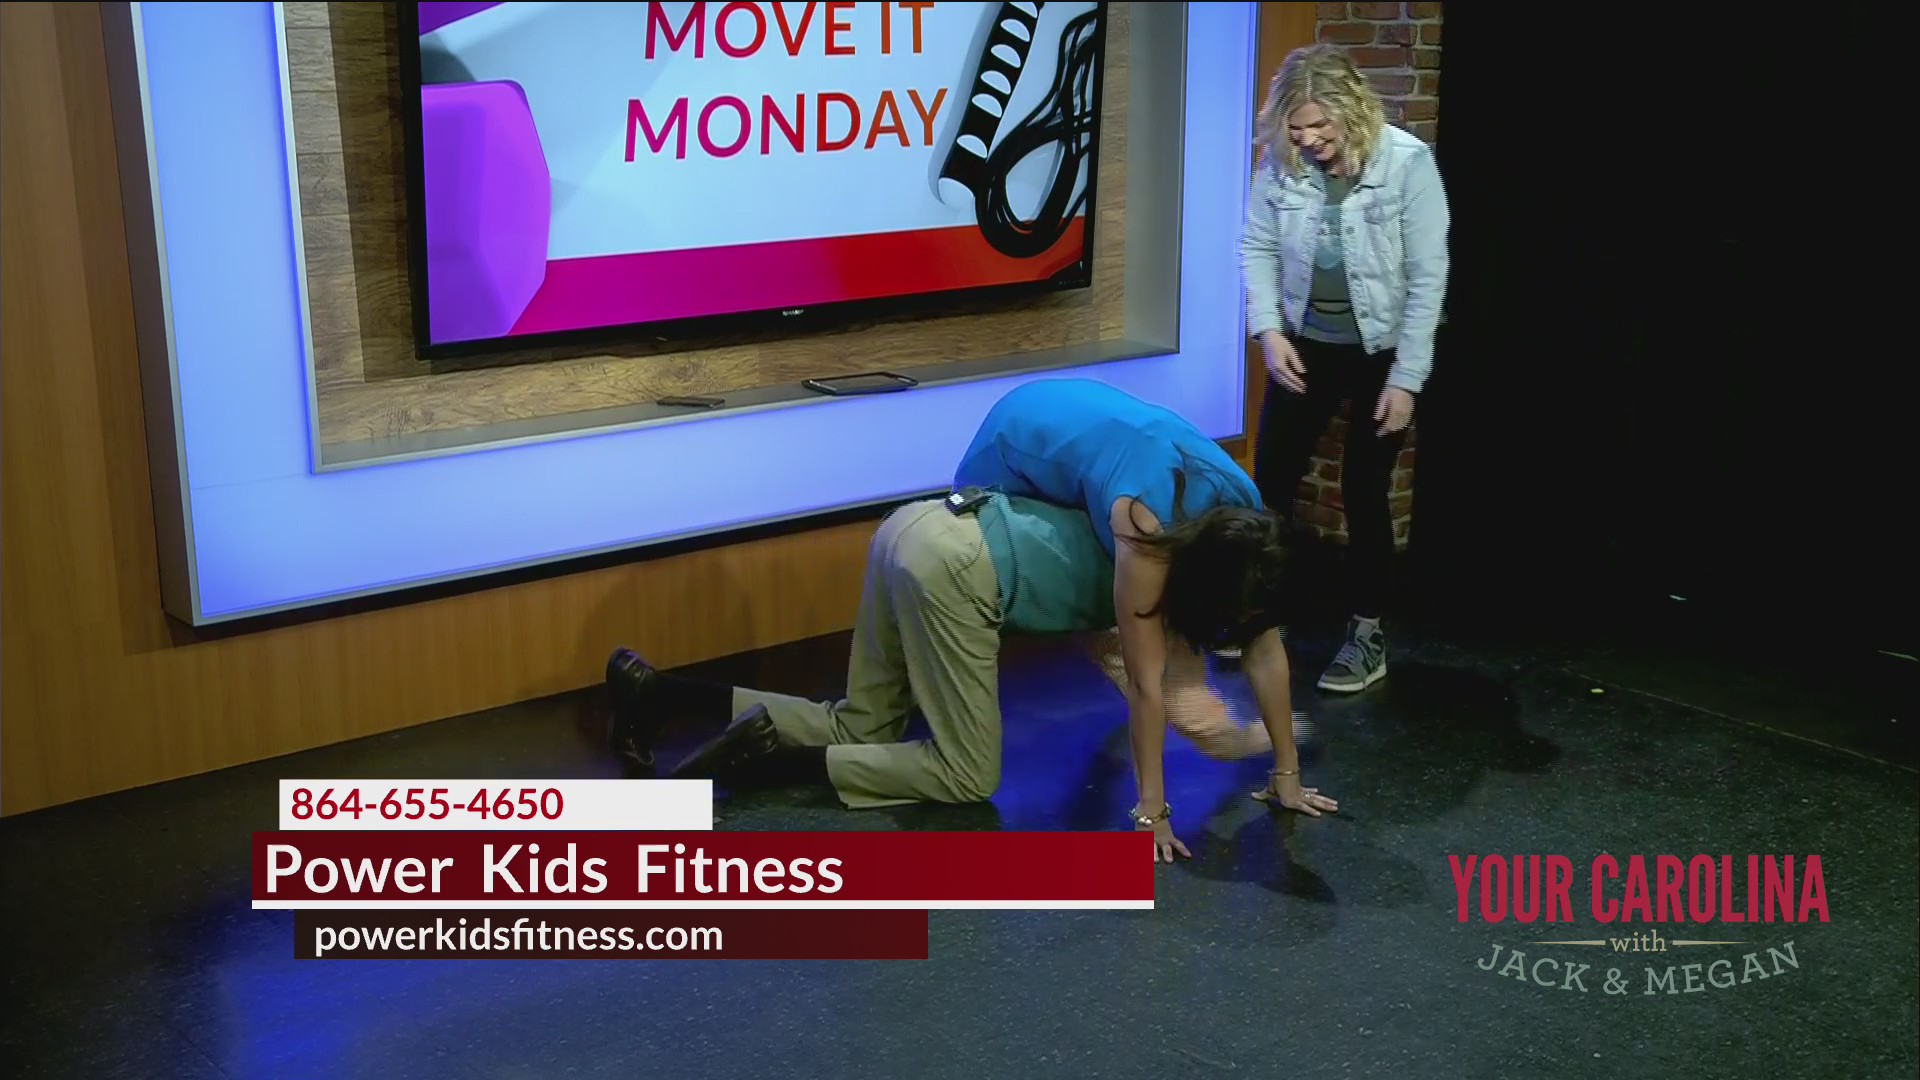 Thumbnail for the video titled "Move It Monday - Power Kids Fitness"